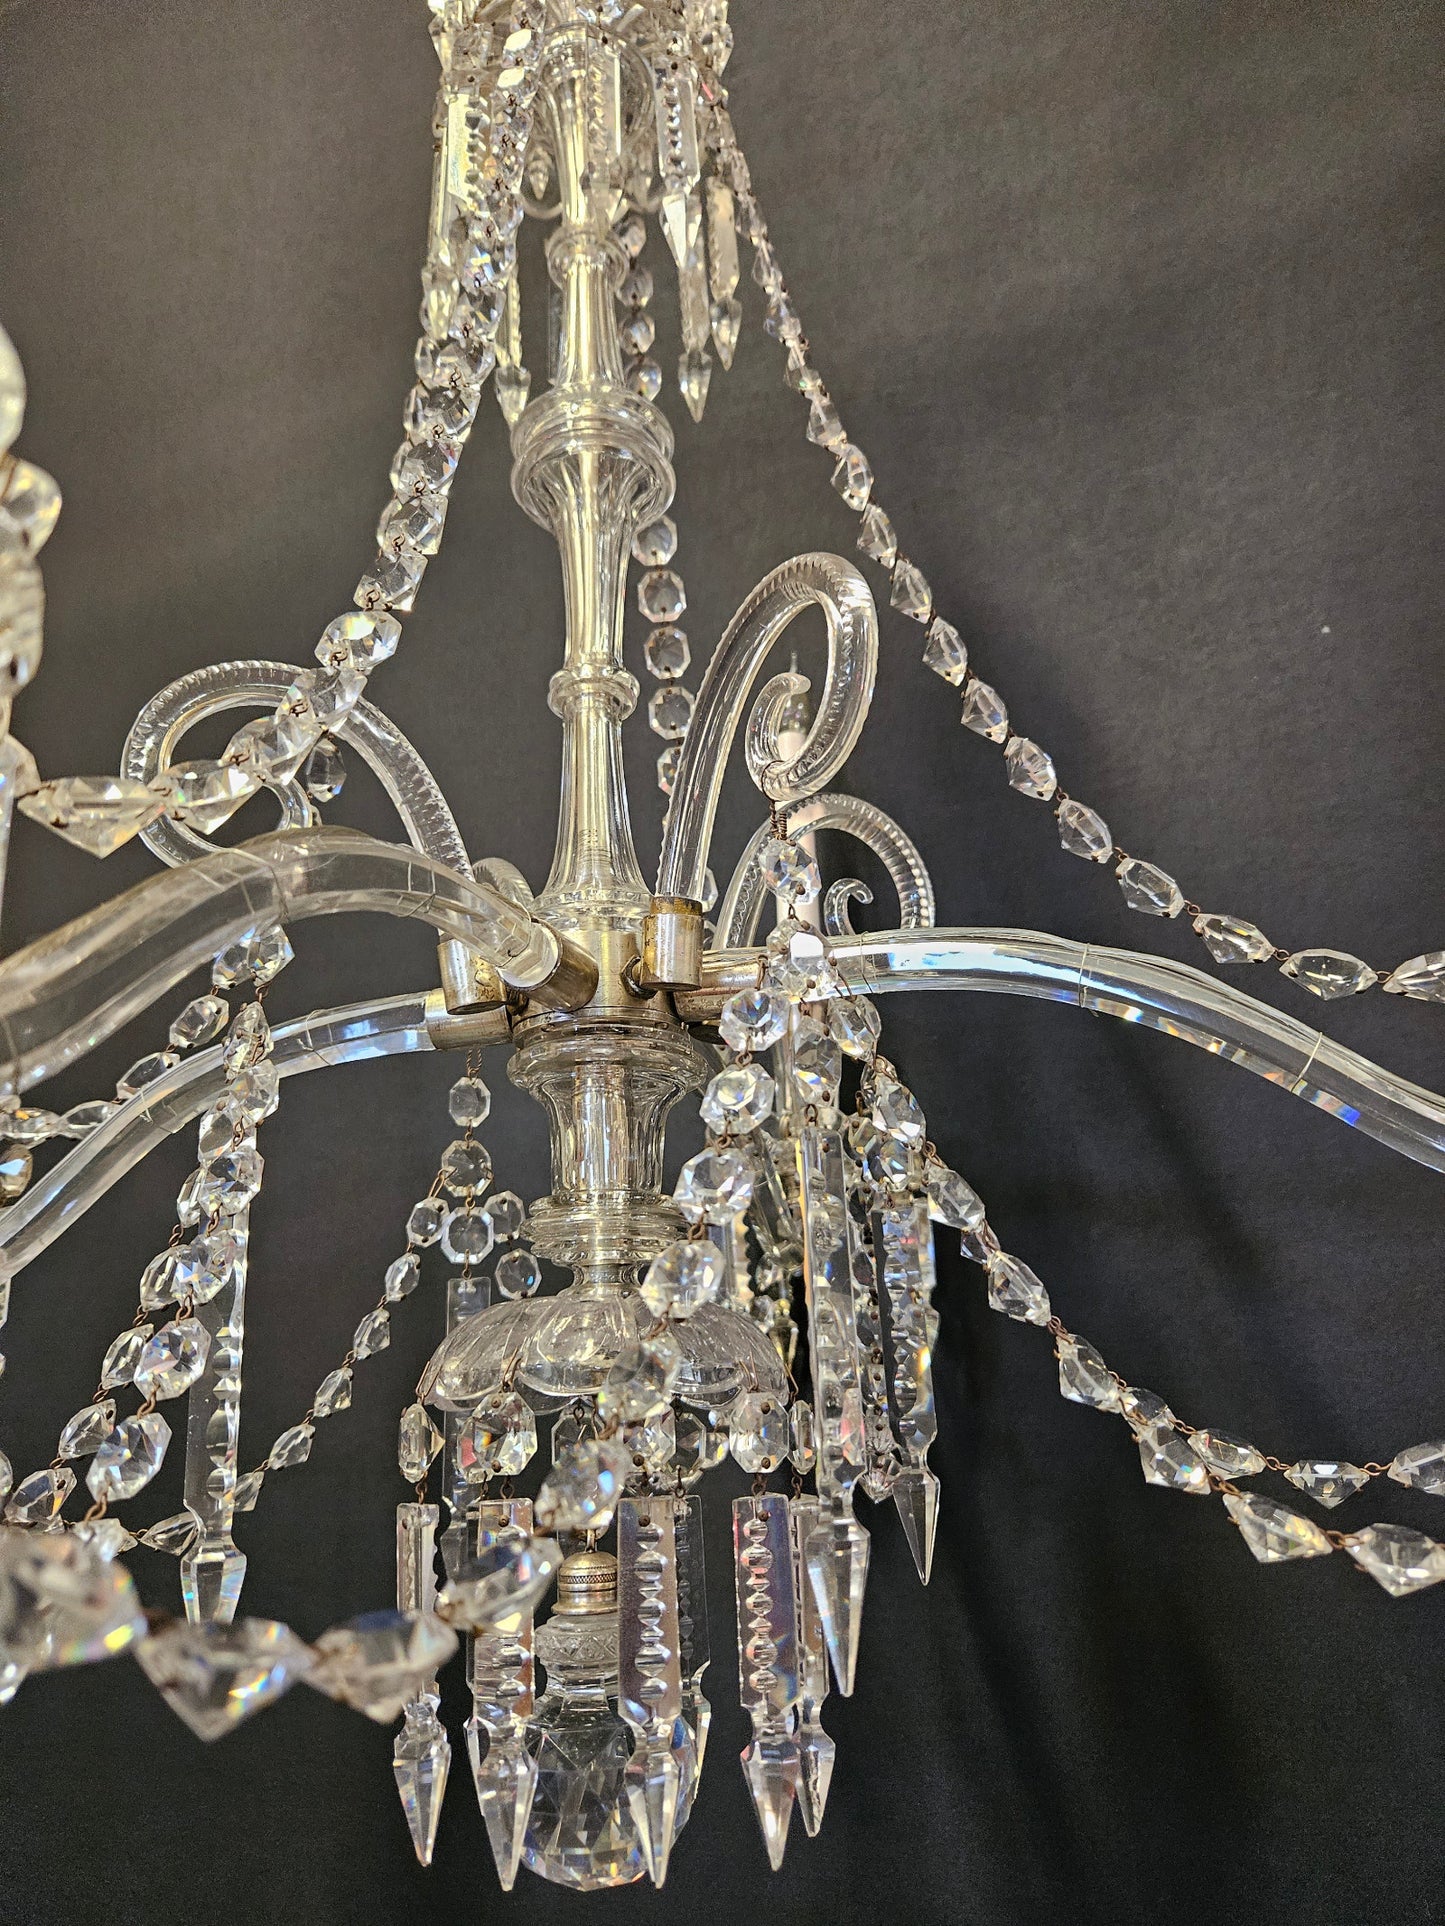 view of centre of chandelier